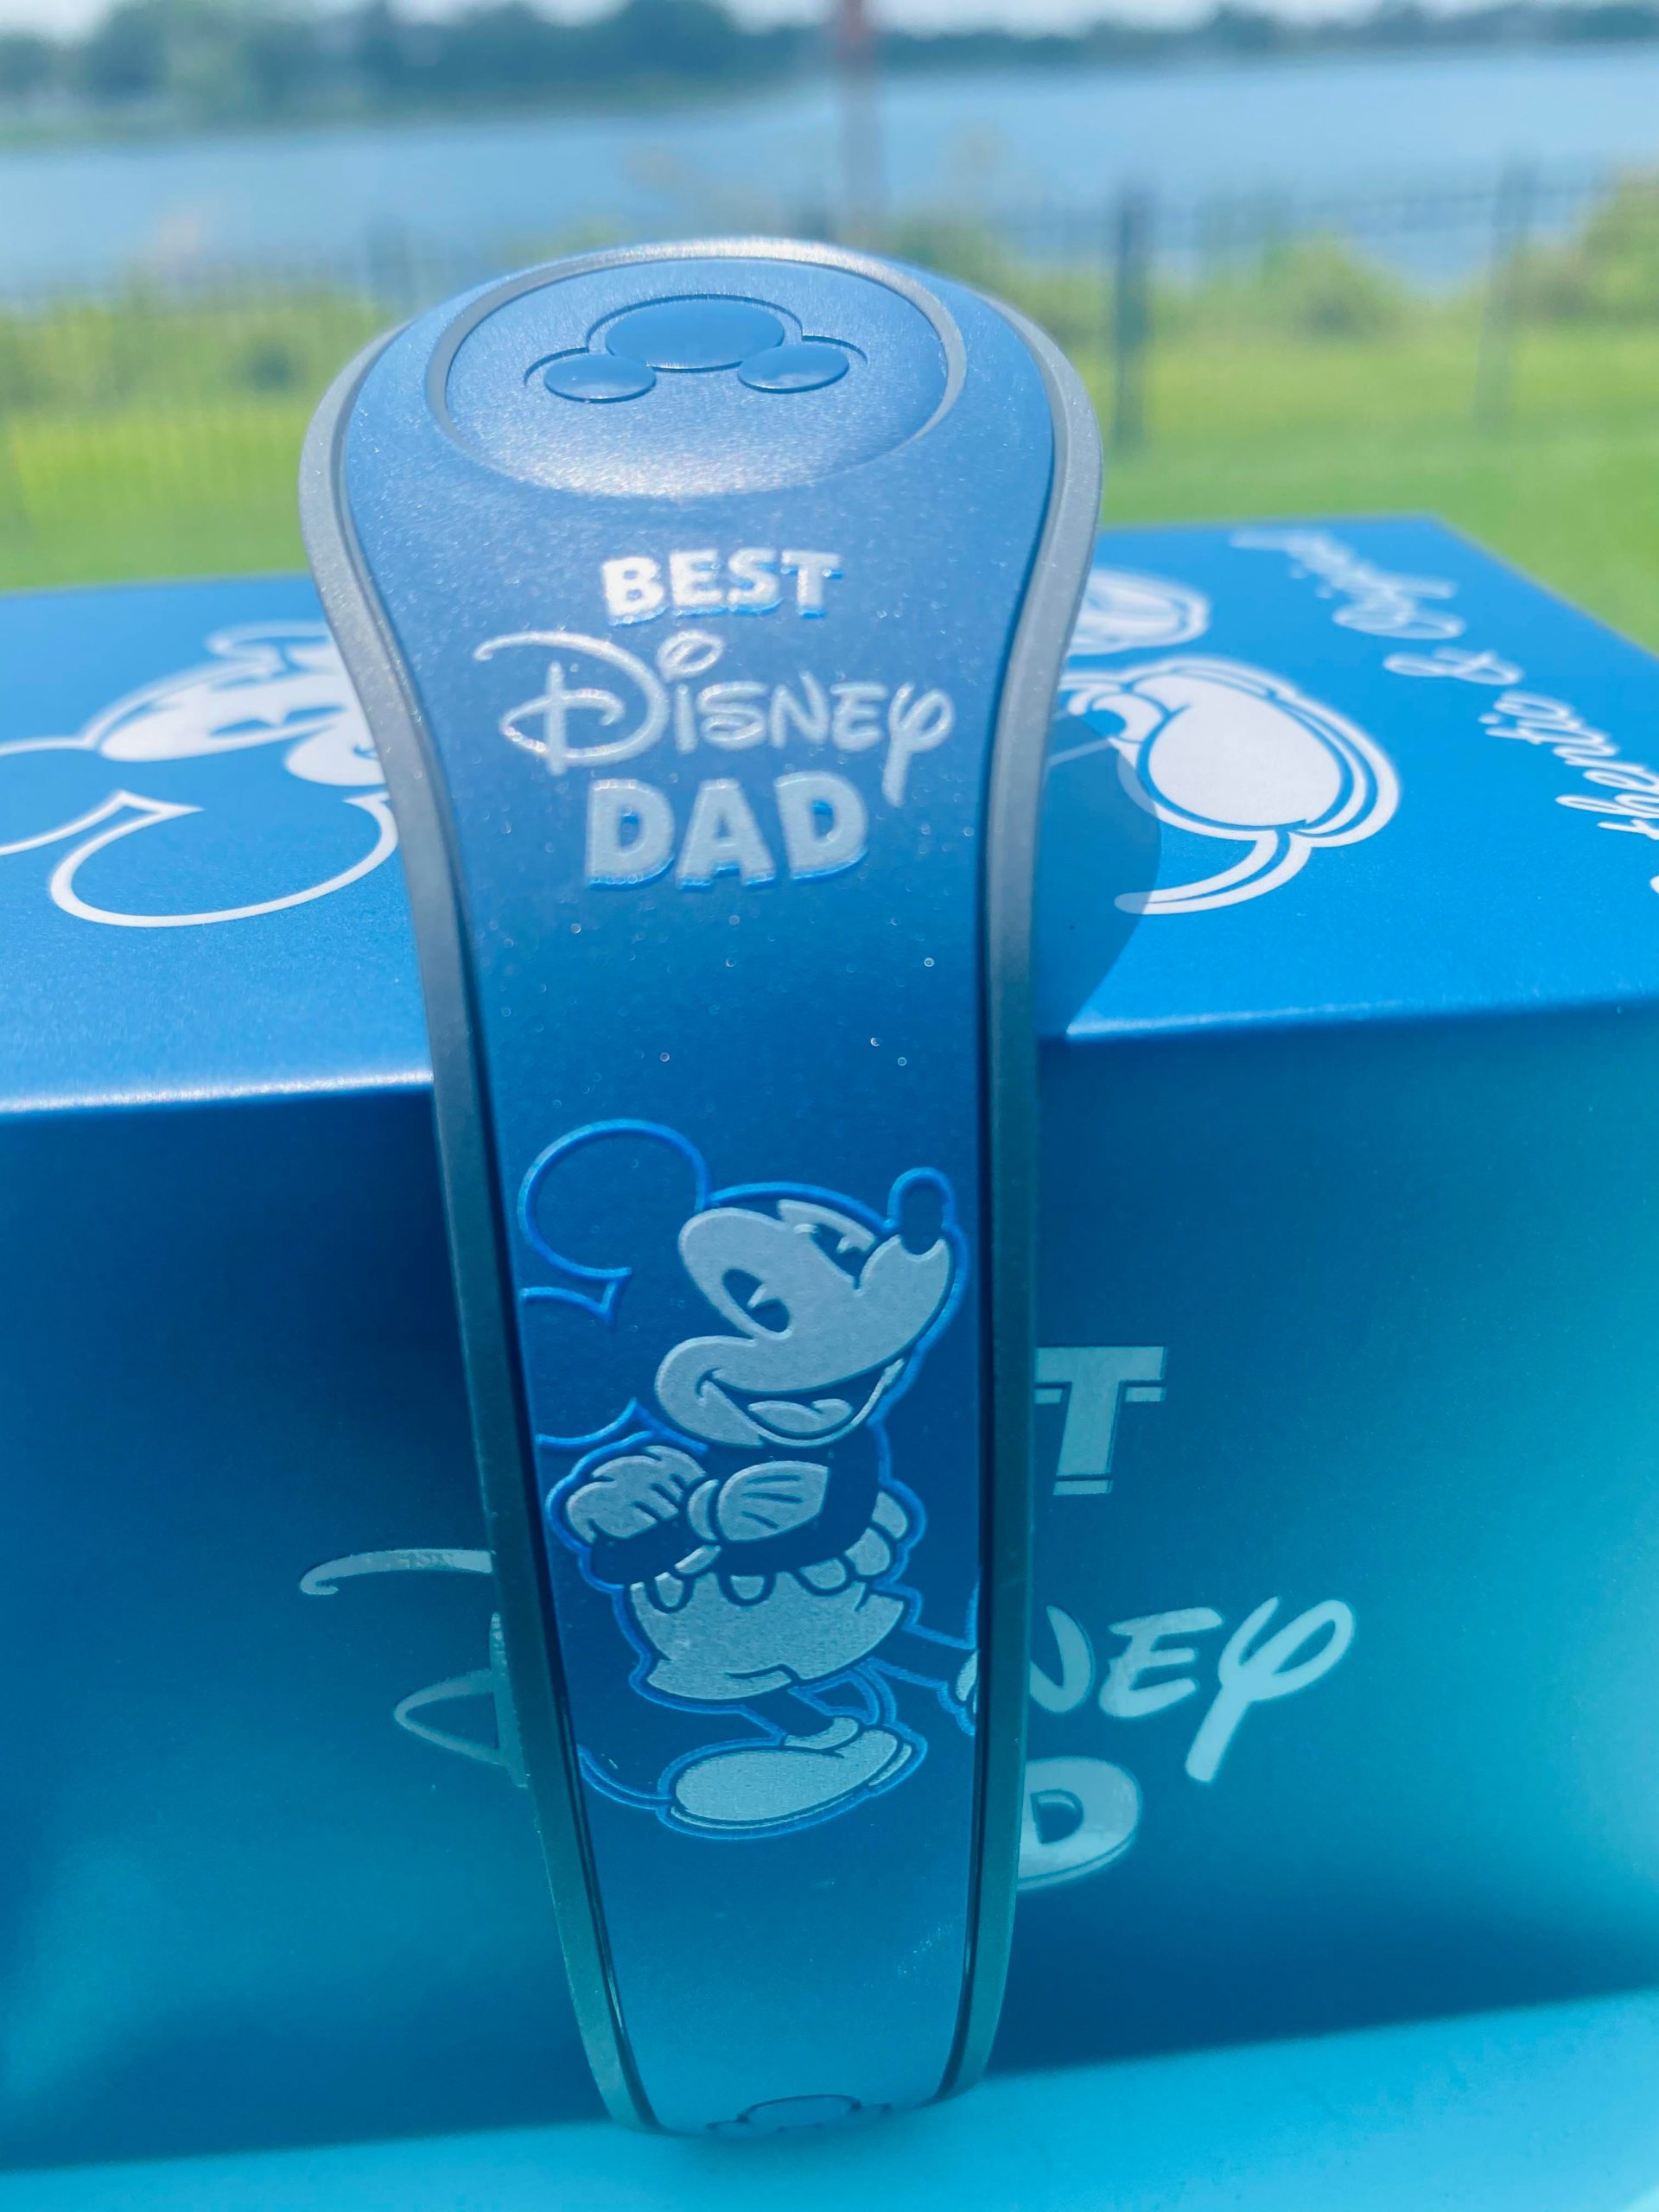 Best Disney DAD MagicBand Just Released!